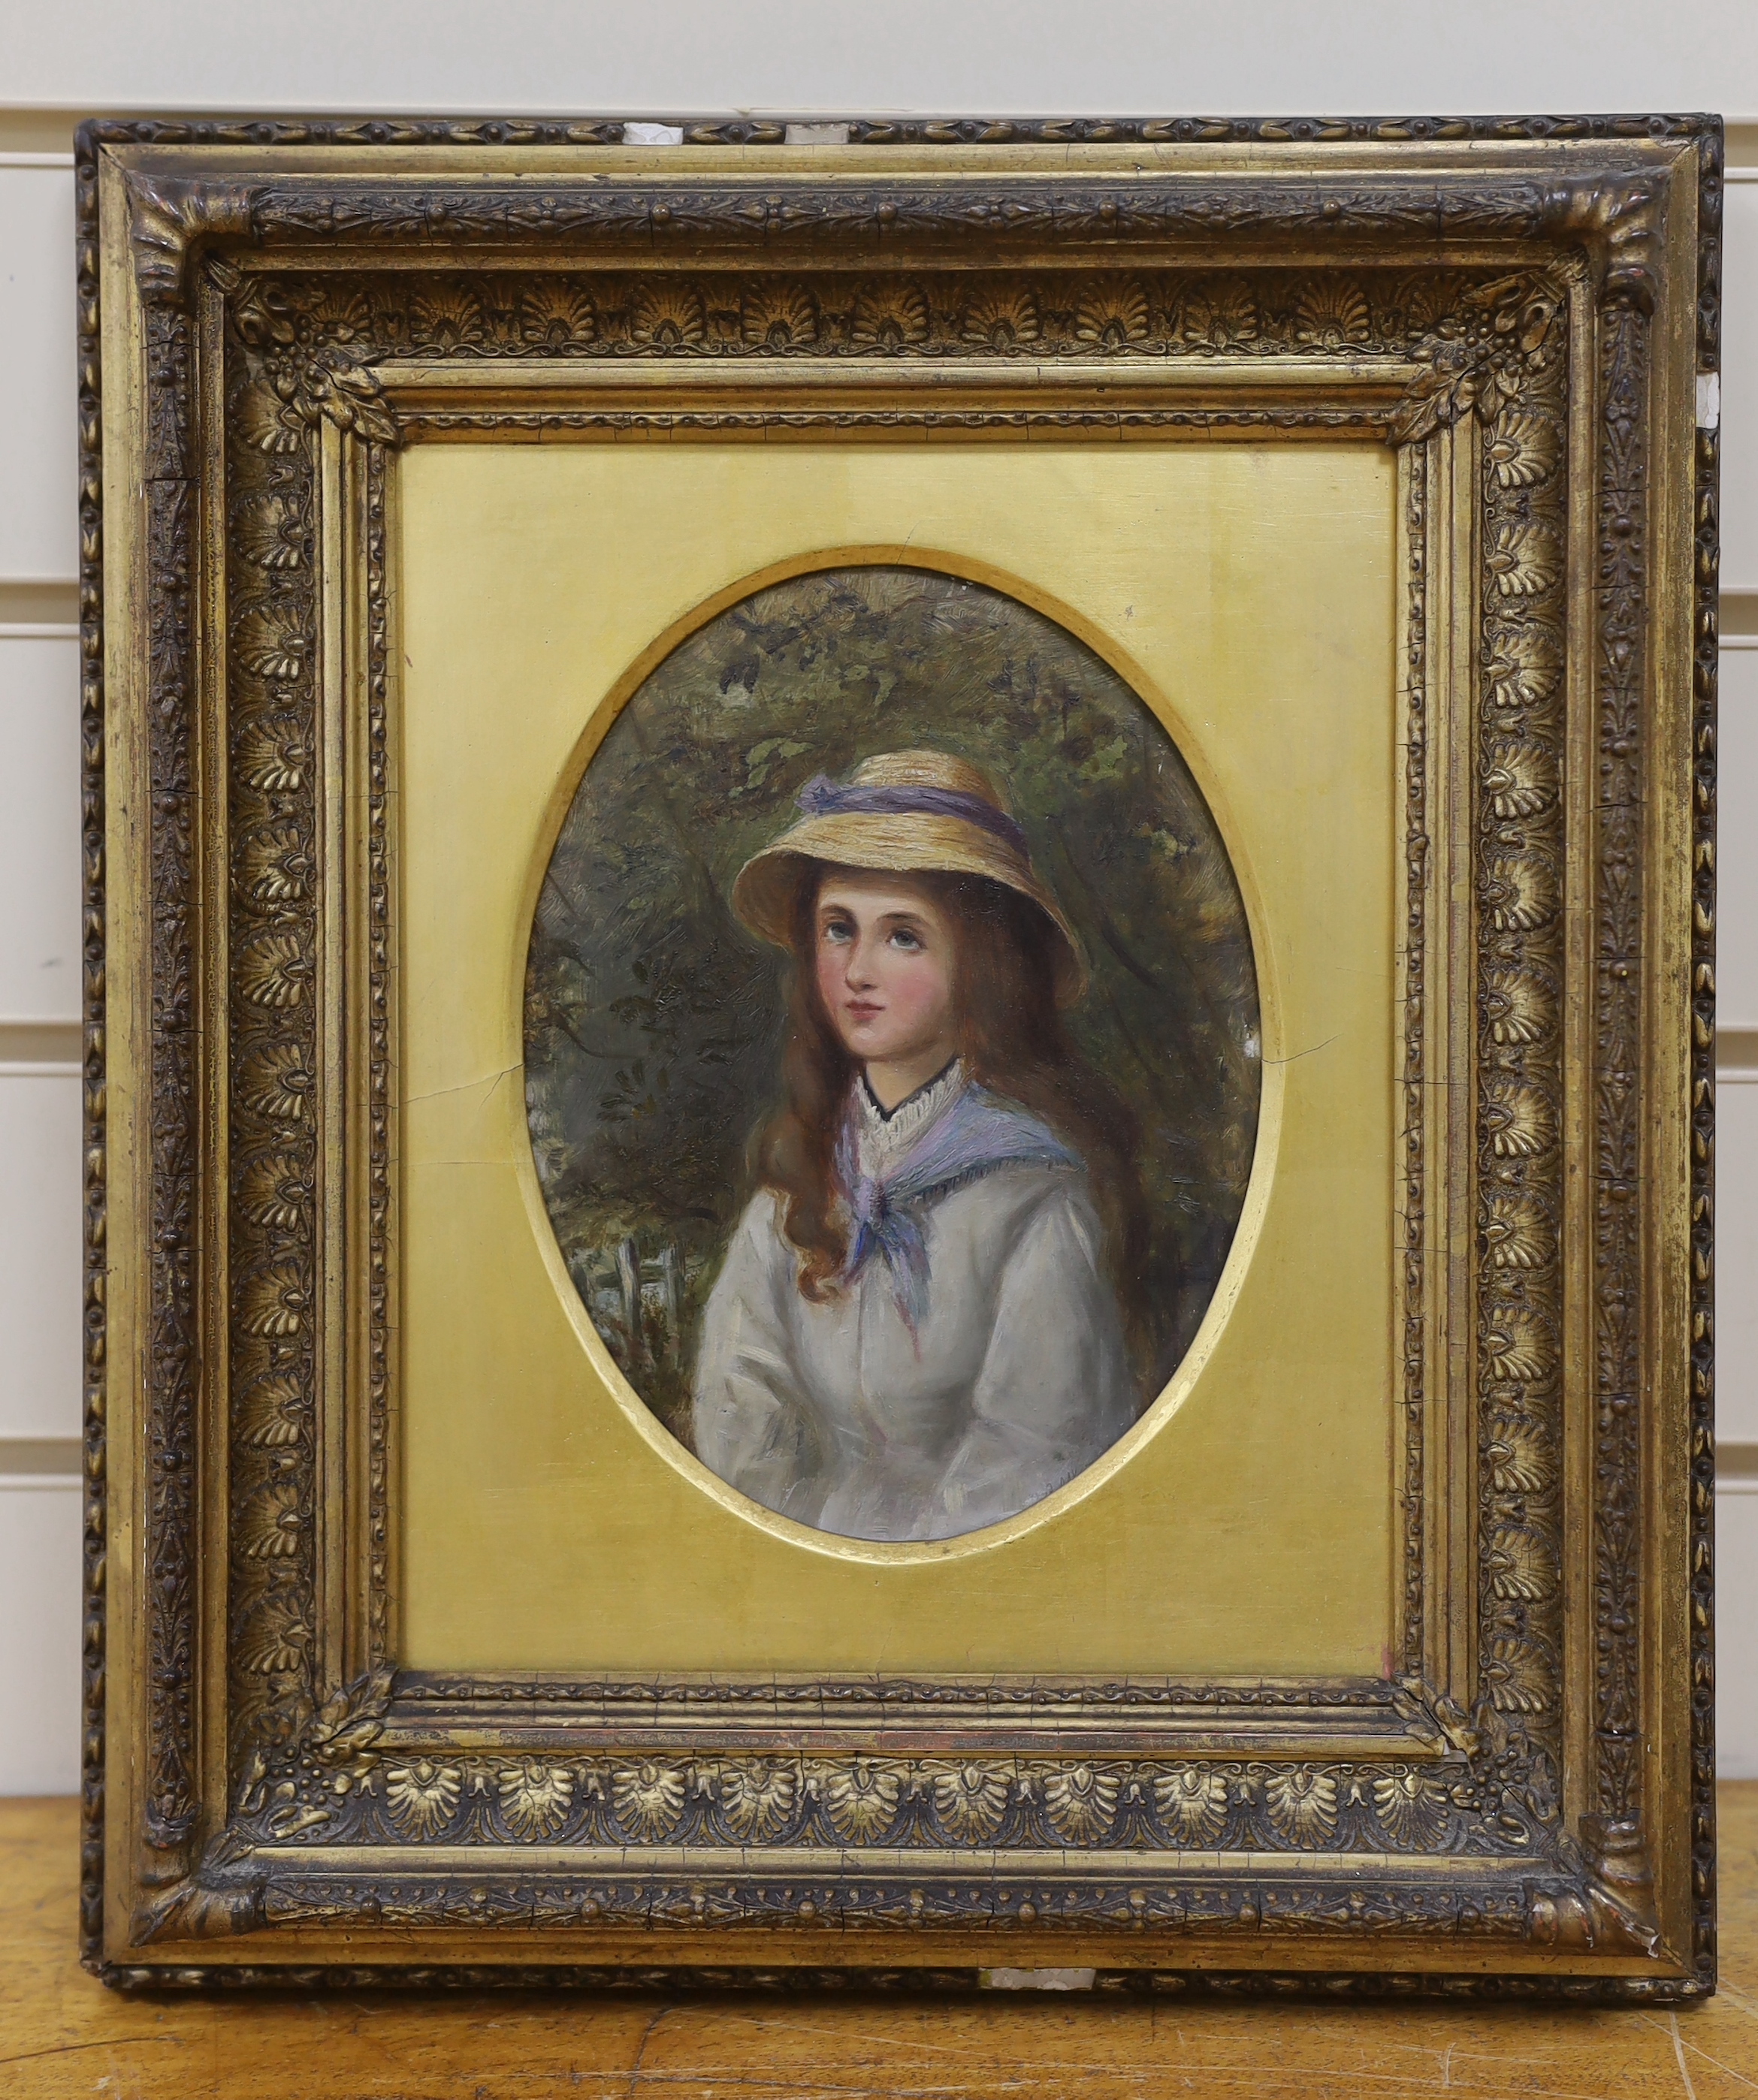 Early 20th century English School, oil on board, Half length portrait of a young lady wearing a bonnet, indistinctly signed, oval, 20 x 15cm, ornate gilt frame